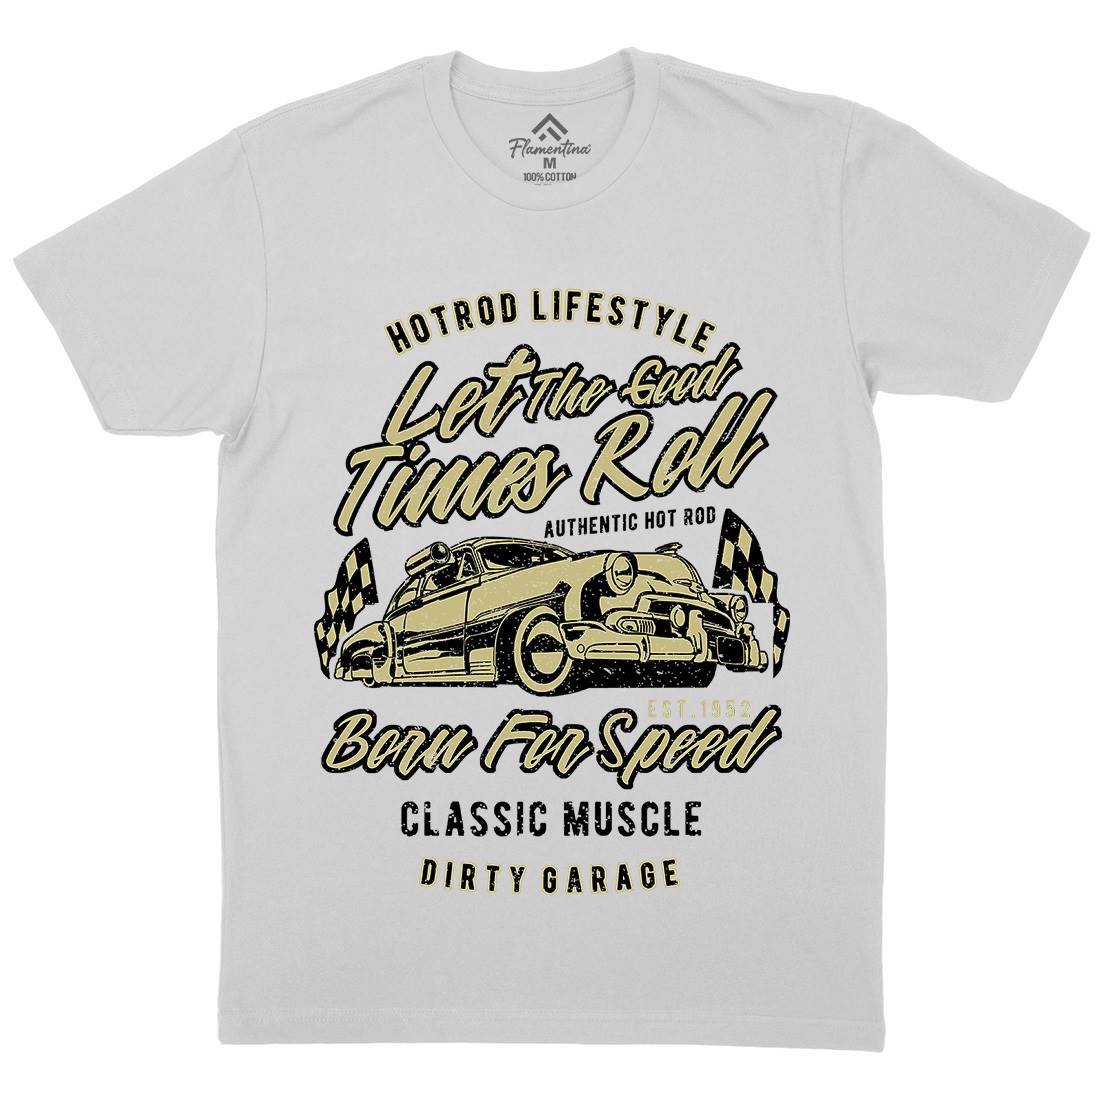 Let The Good Times Roll Mens Crew Neck T-Shirt Cars A705